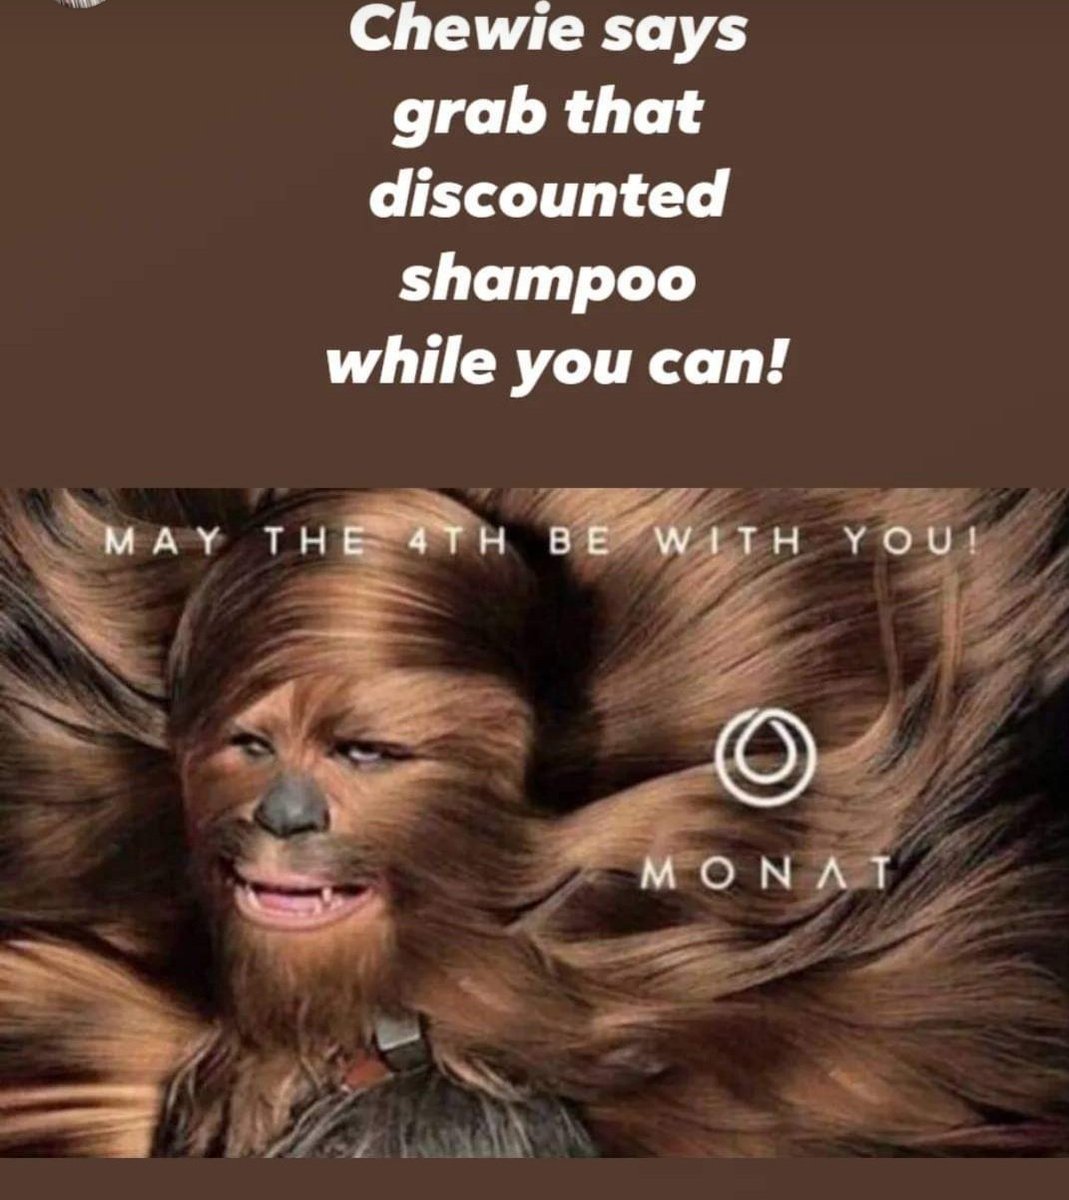 Promo Ends tonight. #haircare #healthychoices #dealsCanada #healthychoices #naturallybased #veganhaircare #crueltyfreeproducts #monatwithdebpage